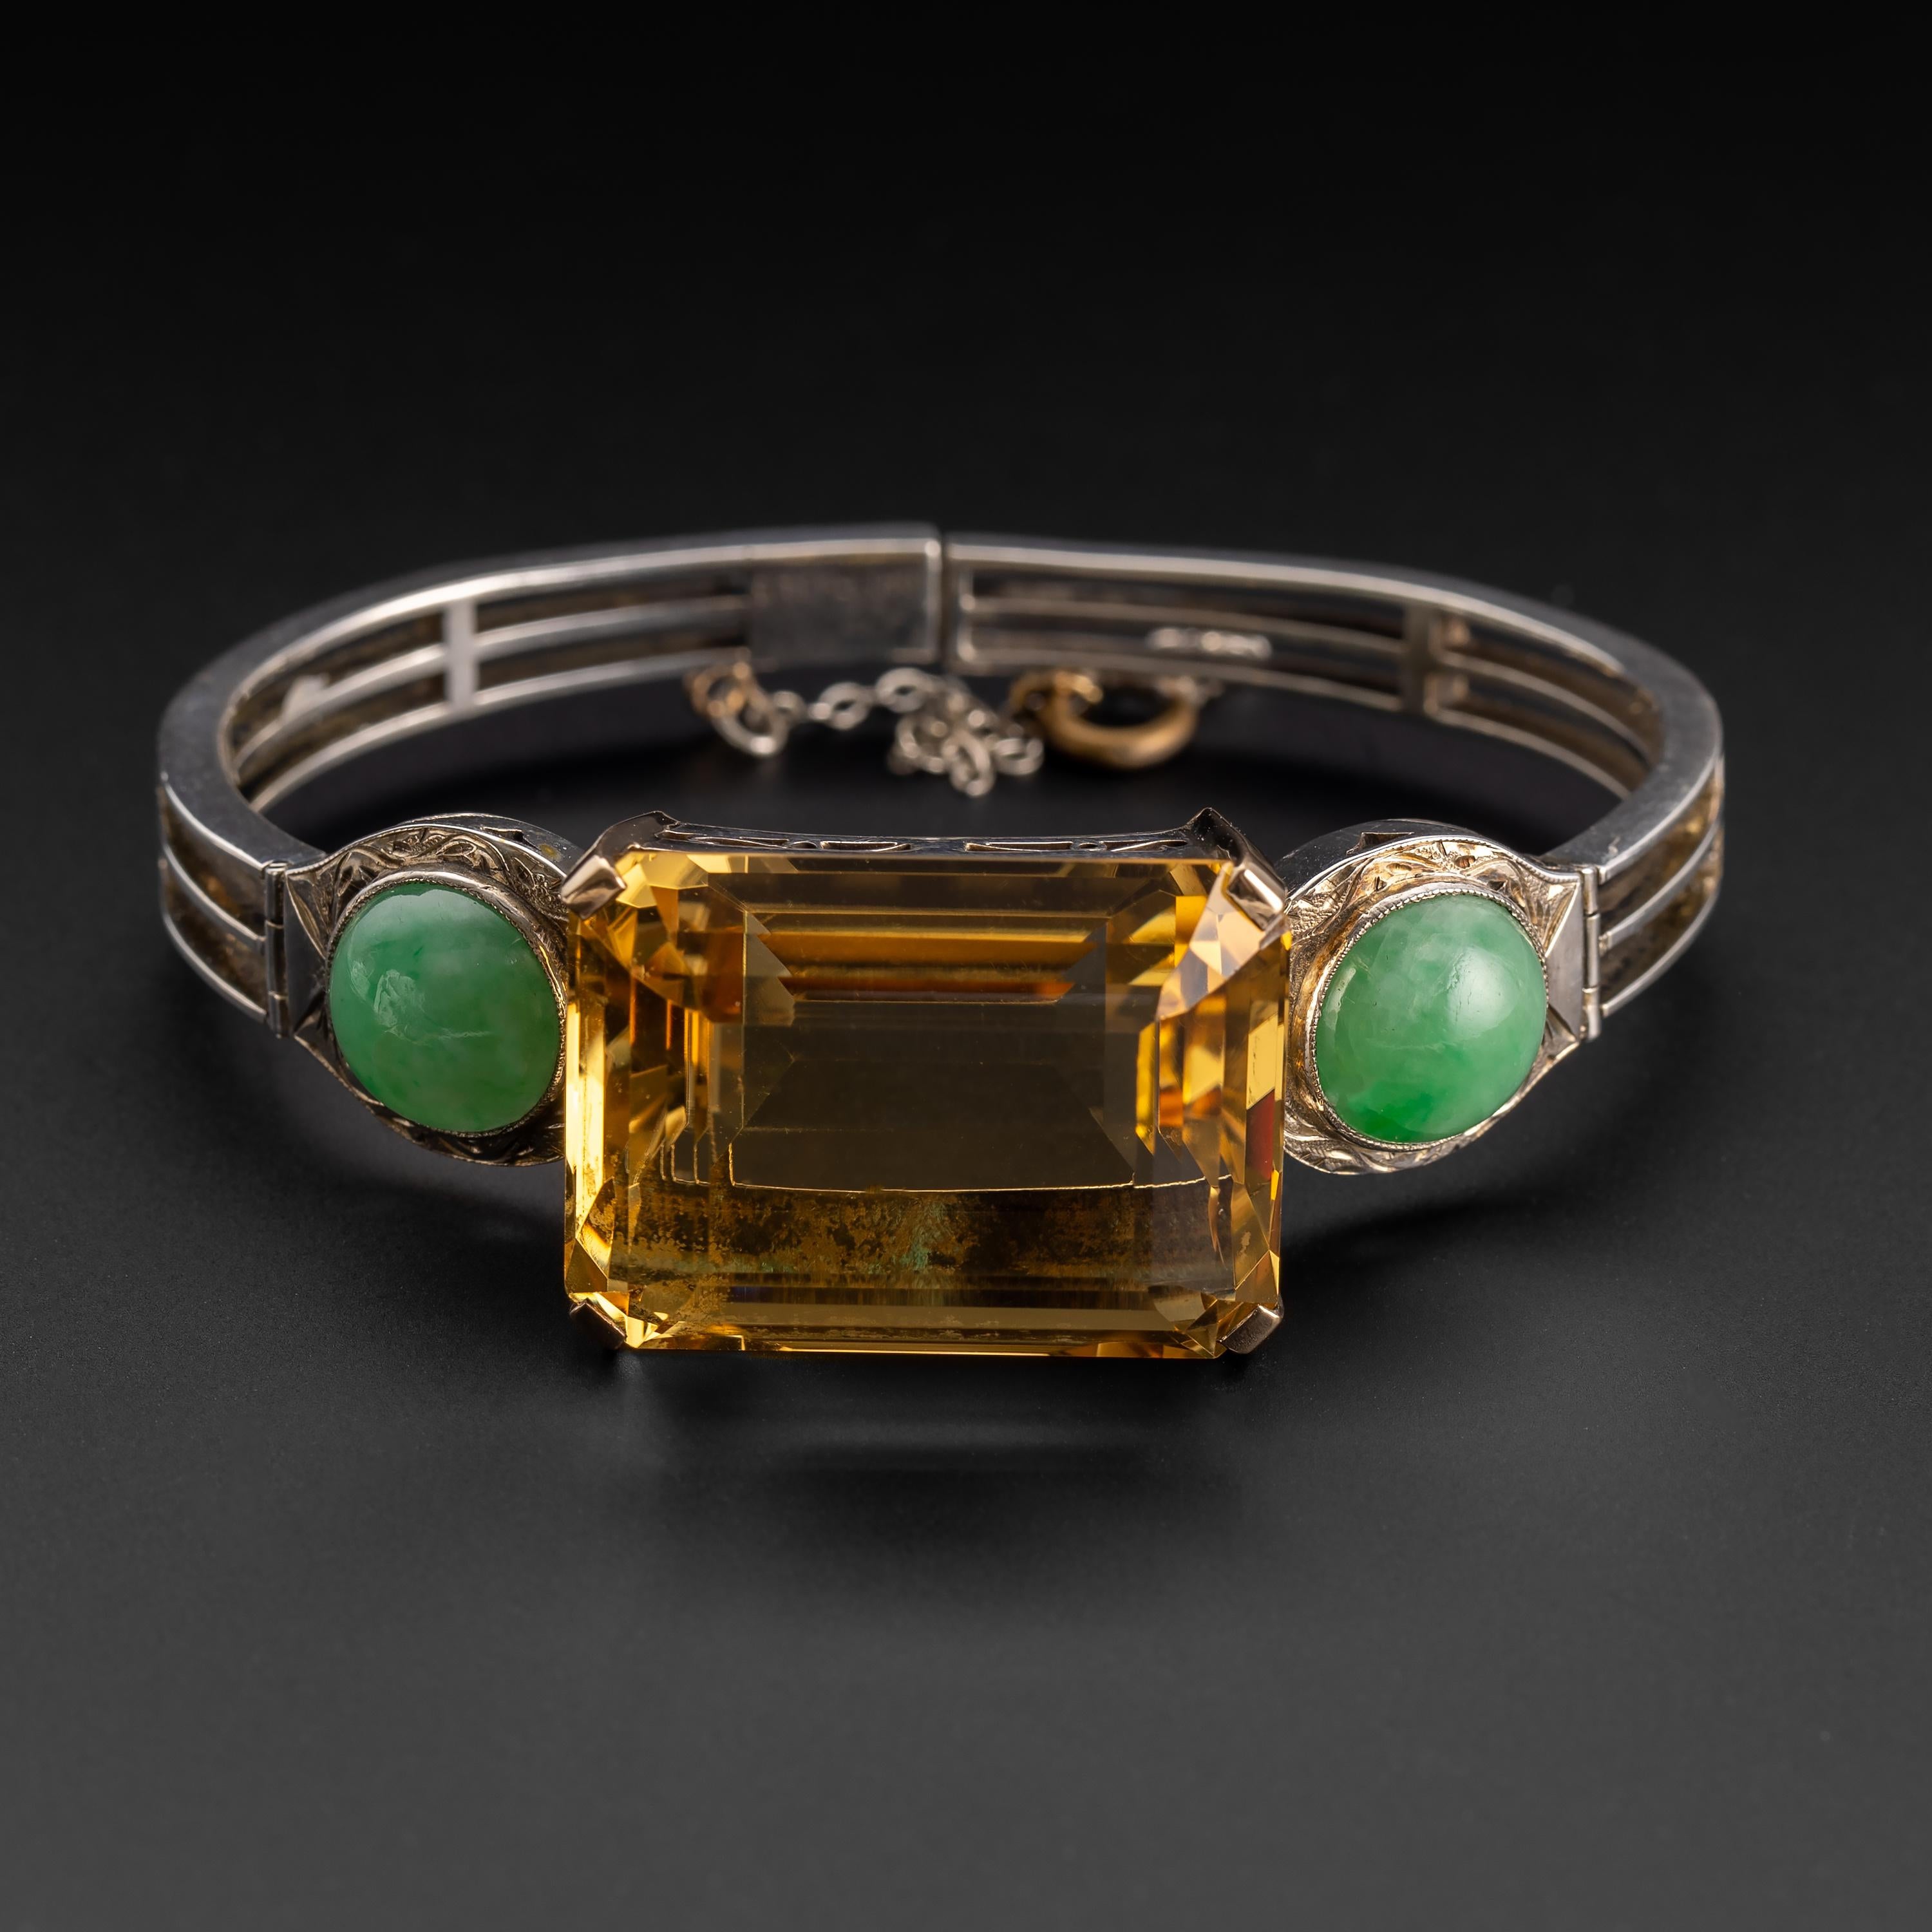 Created in silver and 14K yellow gold, this striking and unique Art Deco bracelet features an enormous 66-carat emerald-cut citrine flanked on either side by a pair of 11.5mm round cabochons of natural and certified untreated apple-green jadeite